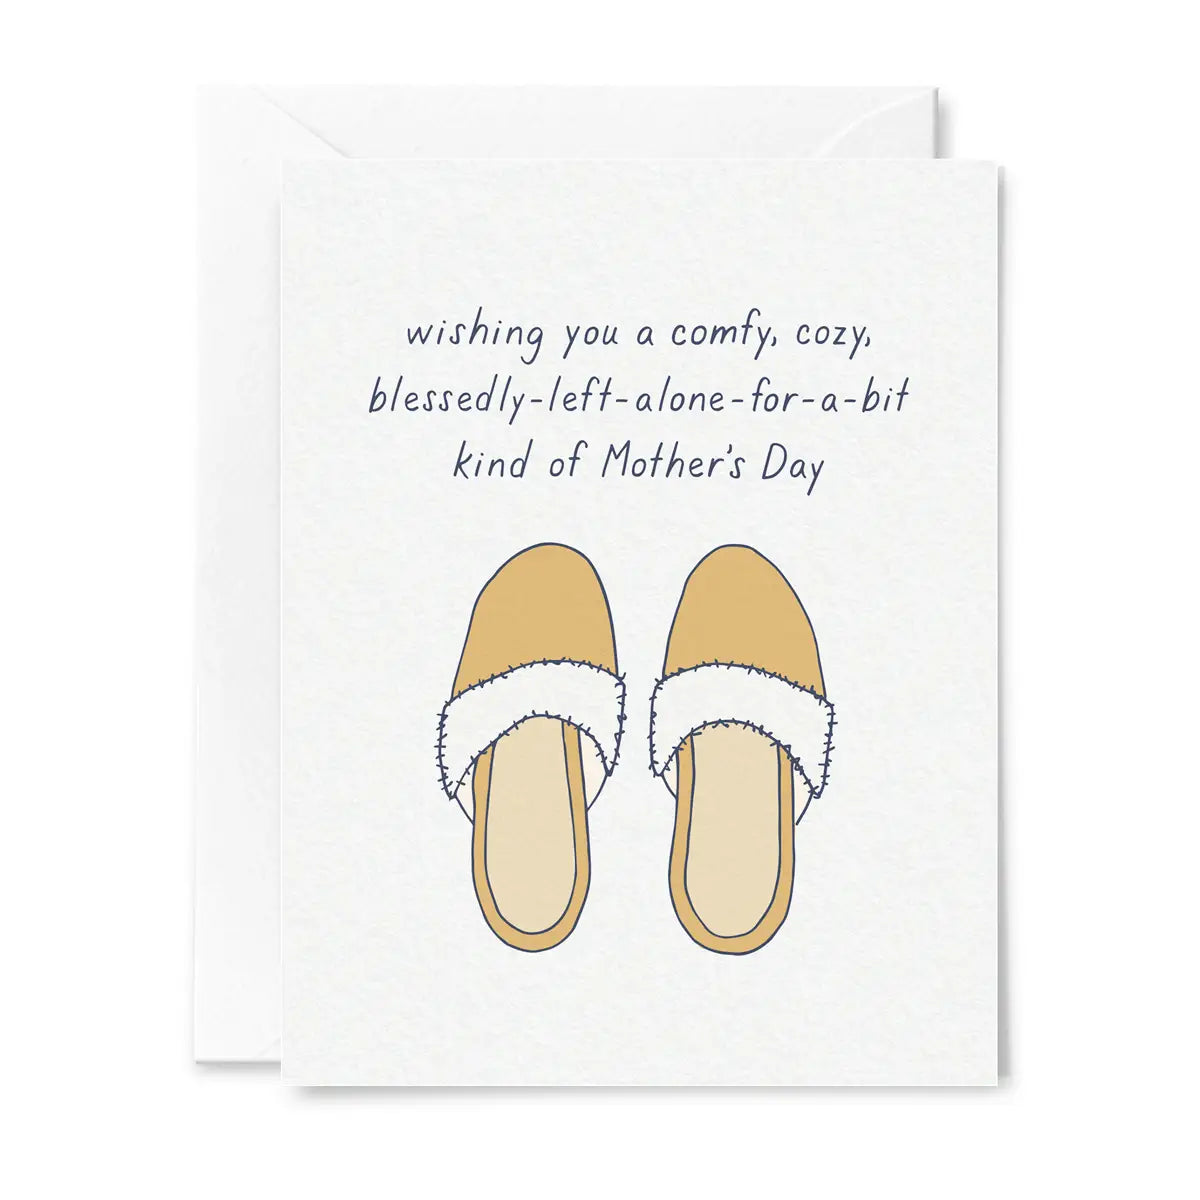 COMFY COZY MOTHER'S DAY CARD